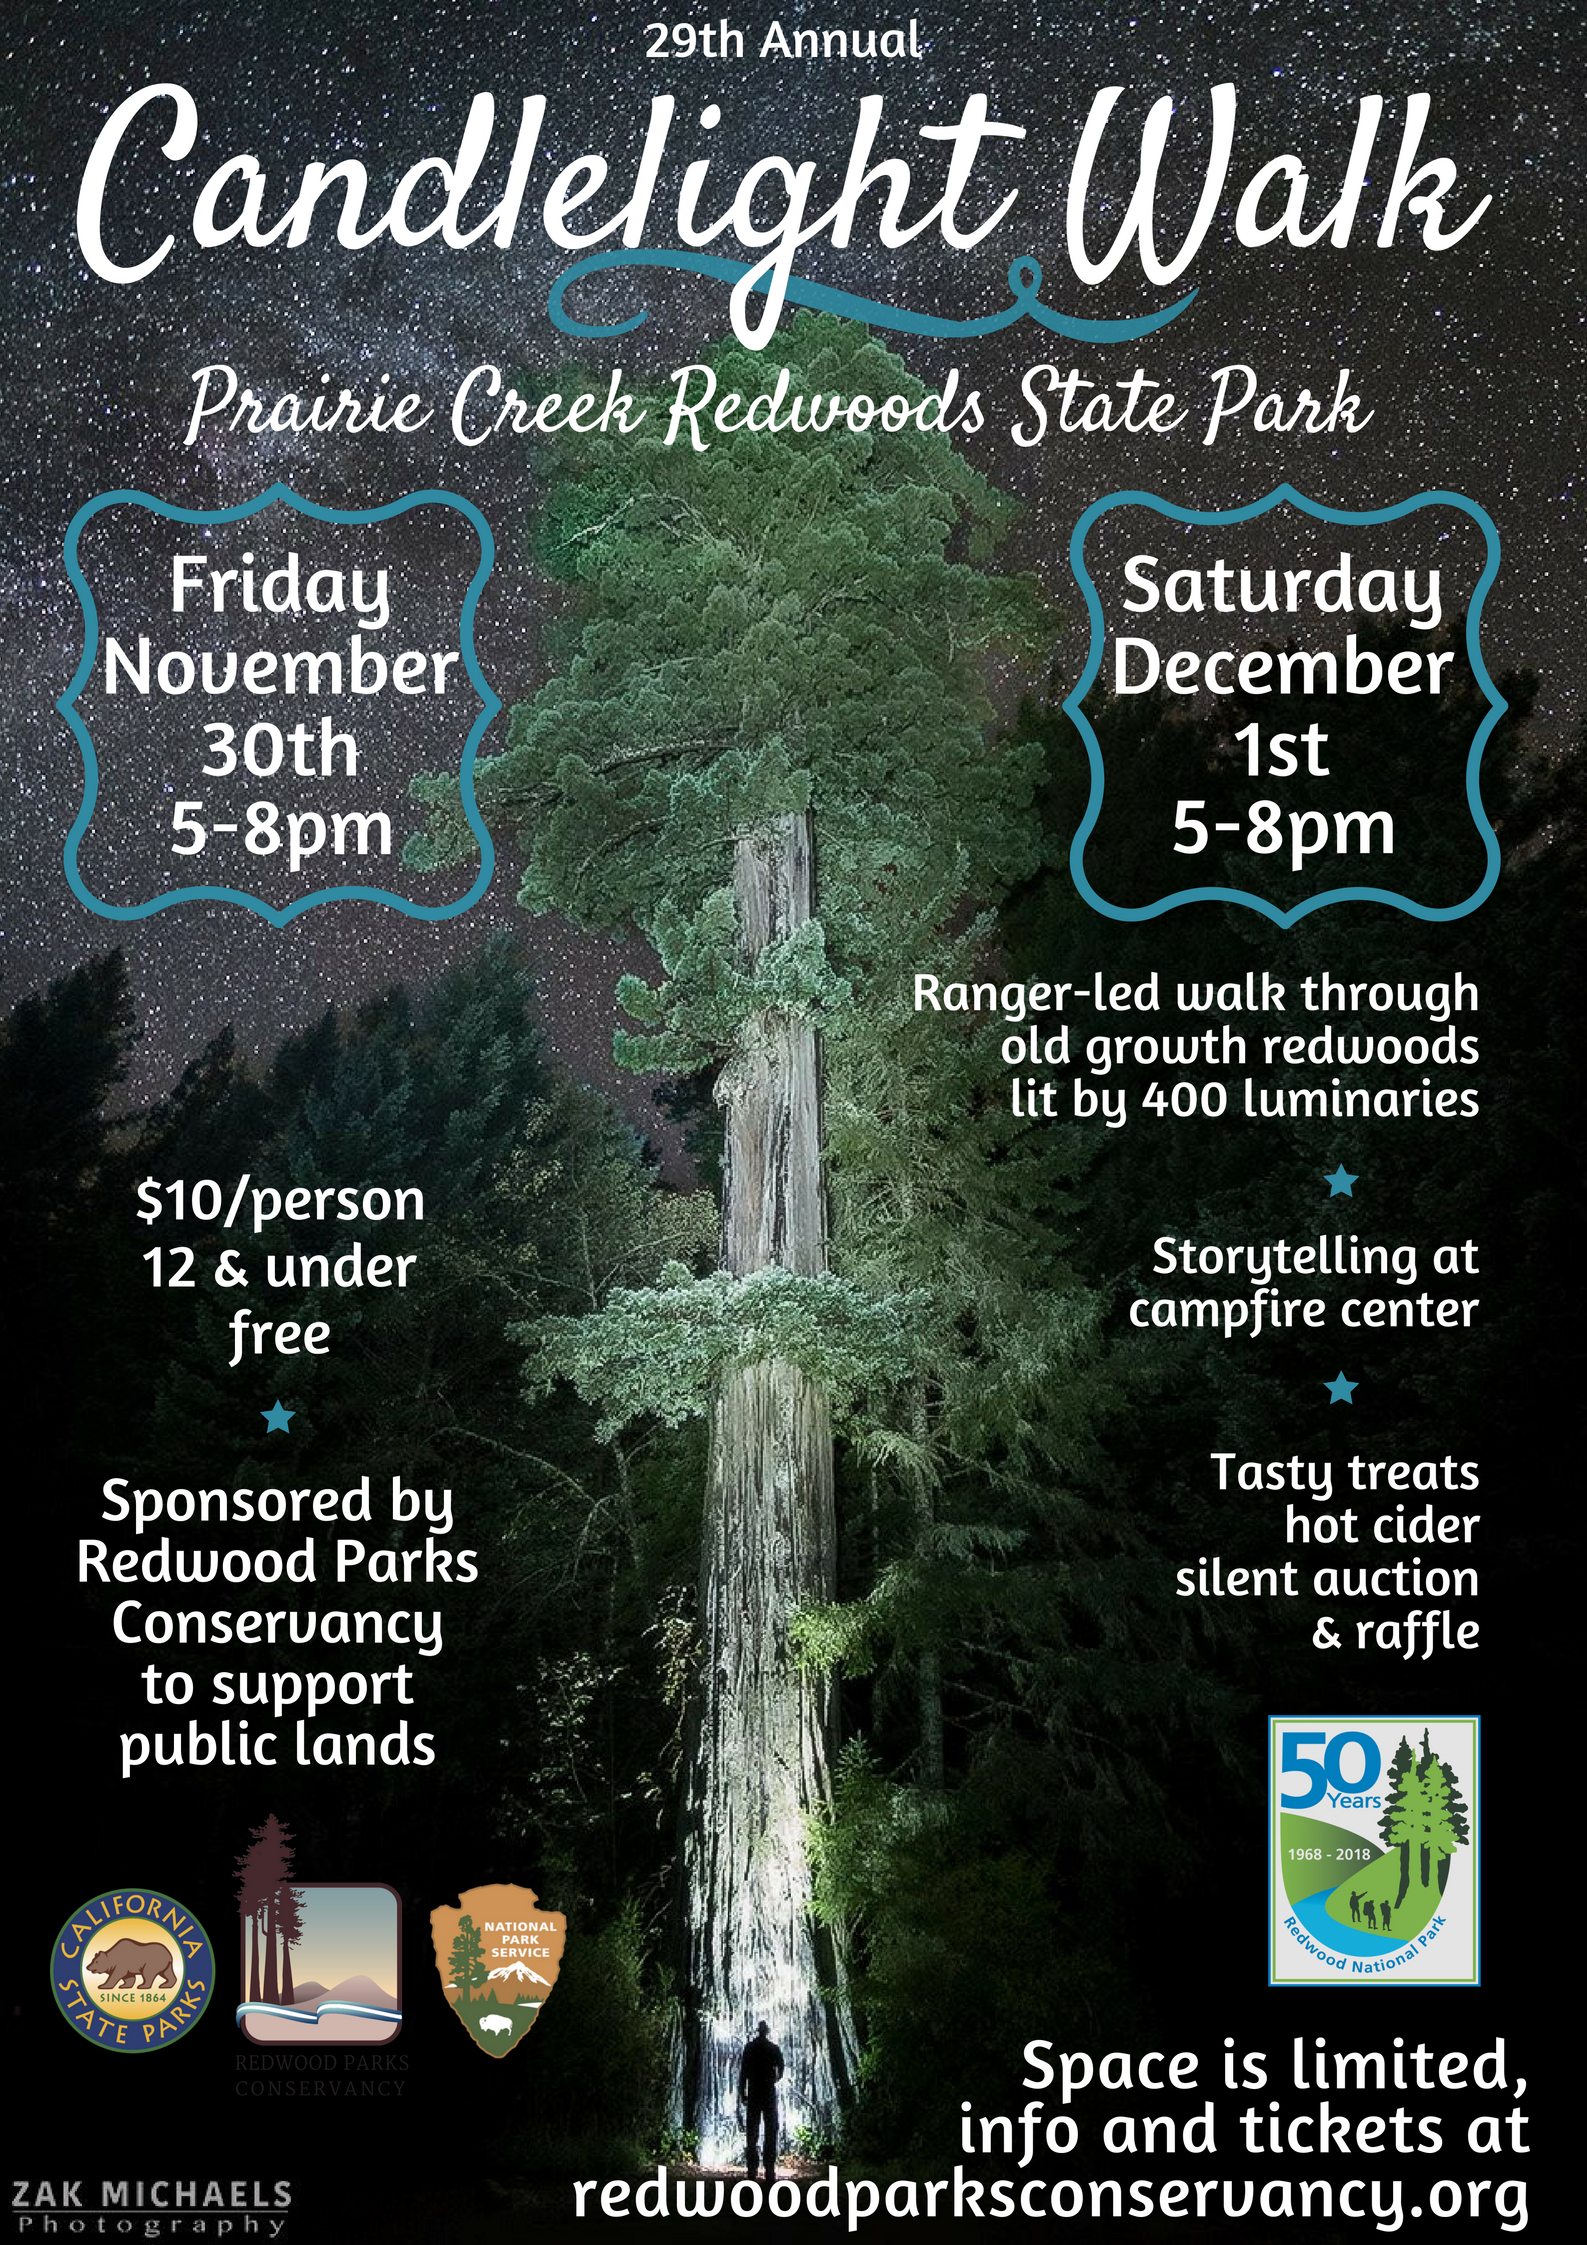 Graphics and redwood tree image for promotional poster